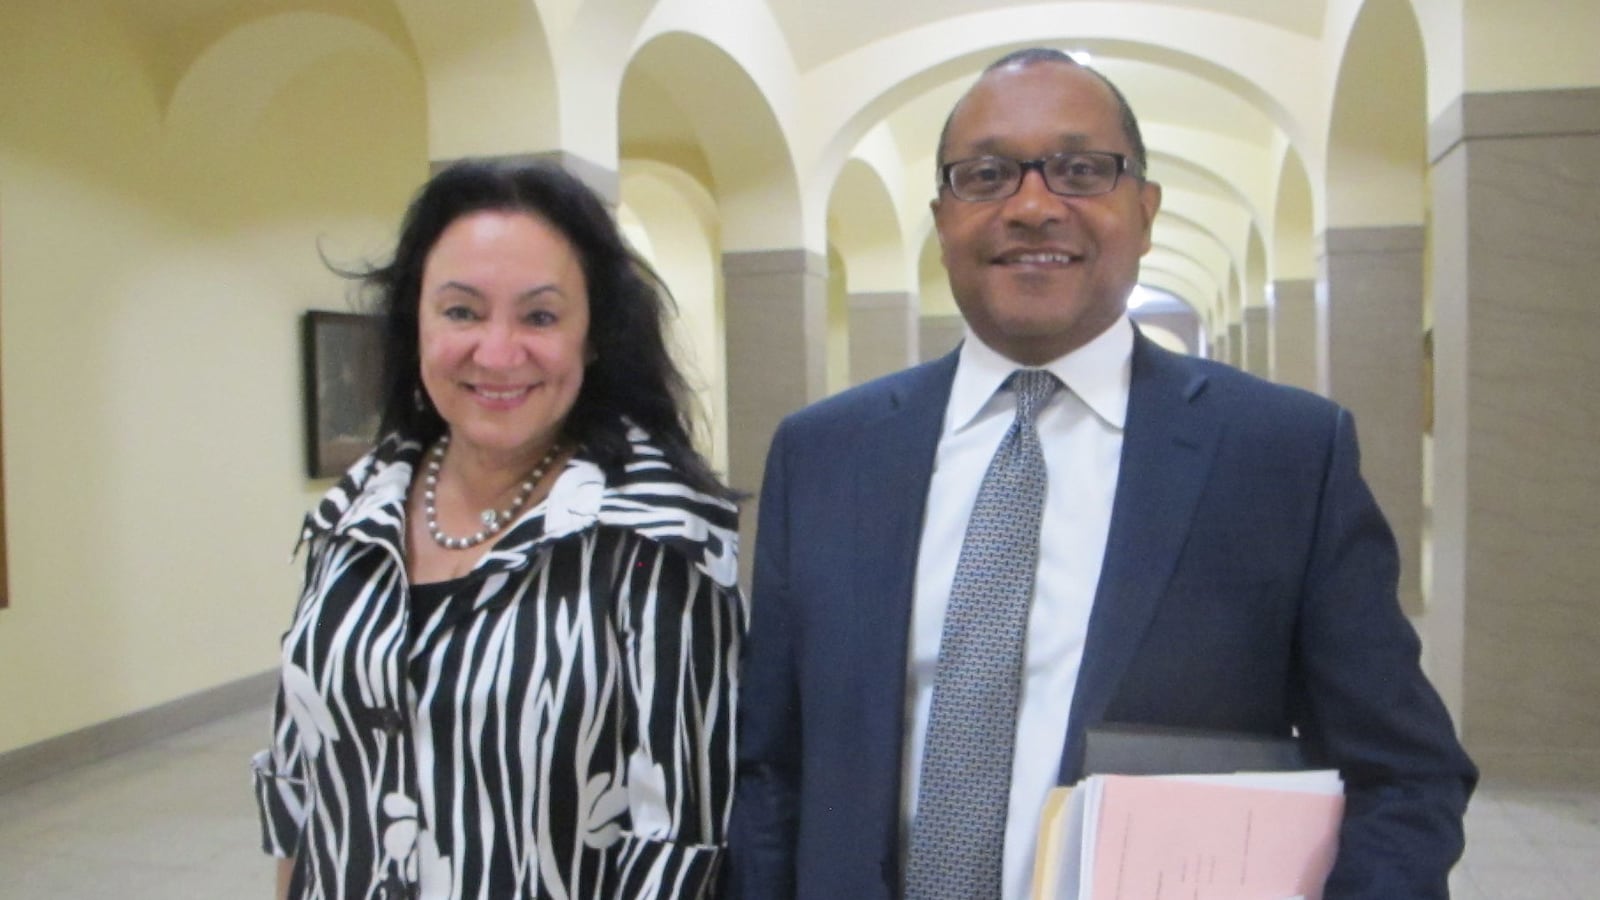 Chancellor Rosa and Vice Chancellor Brown attend a Board of Regents meeting.